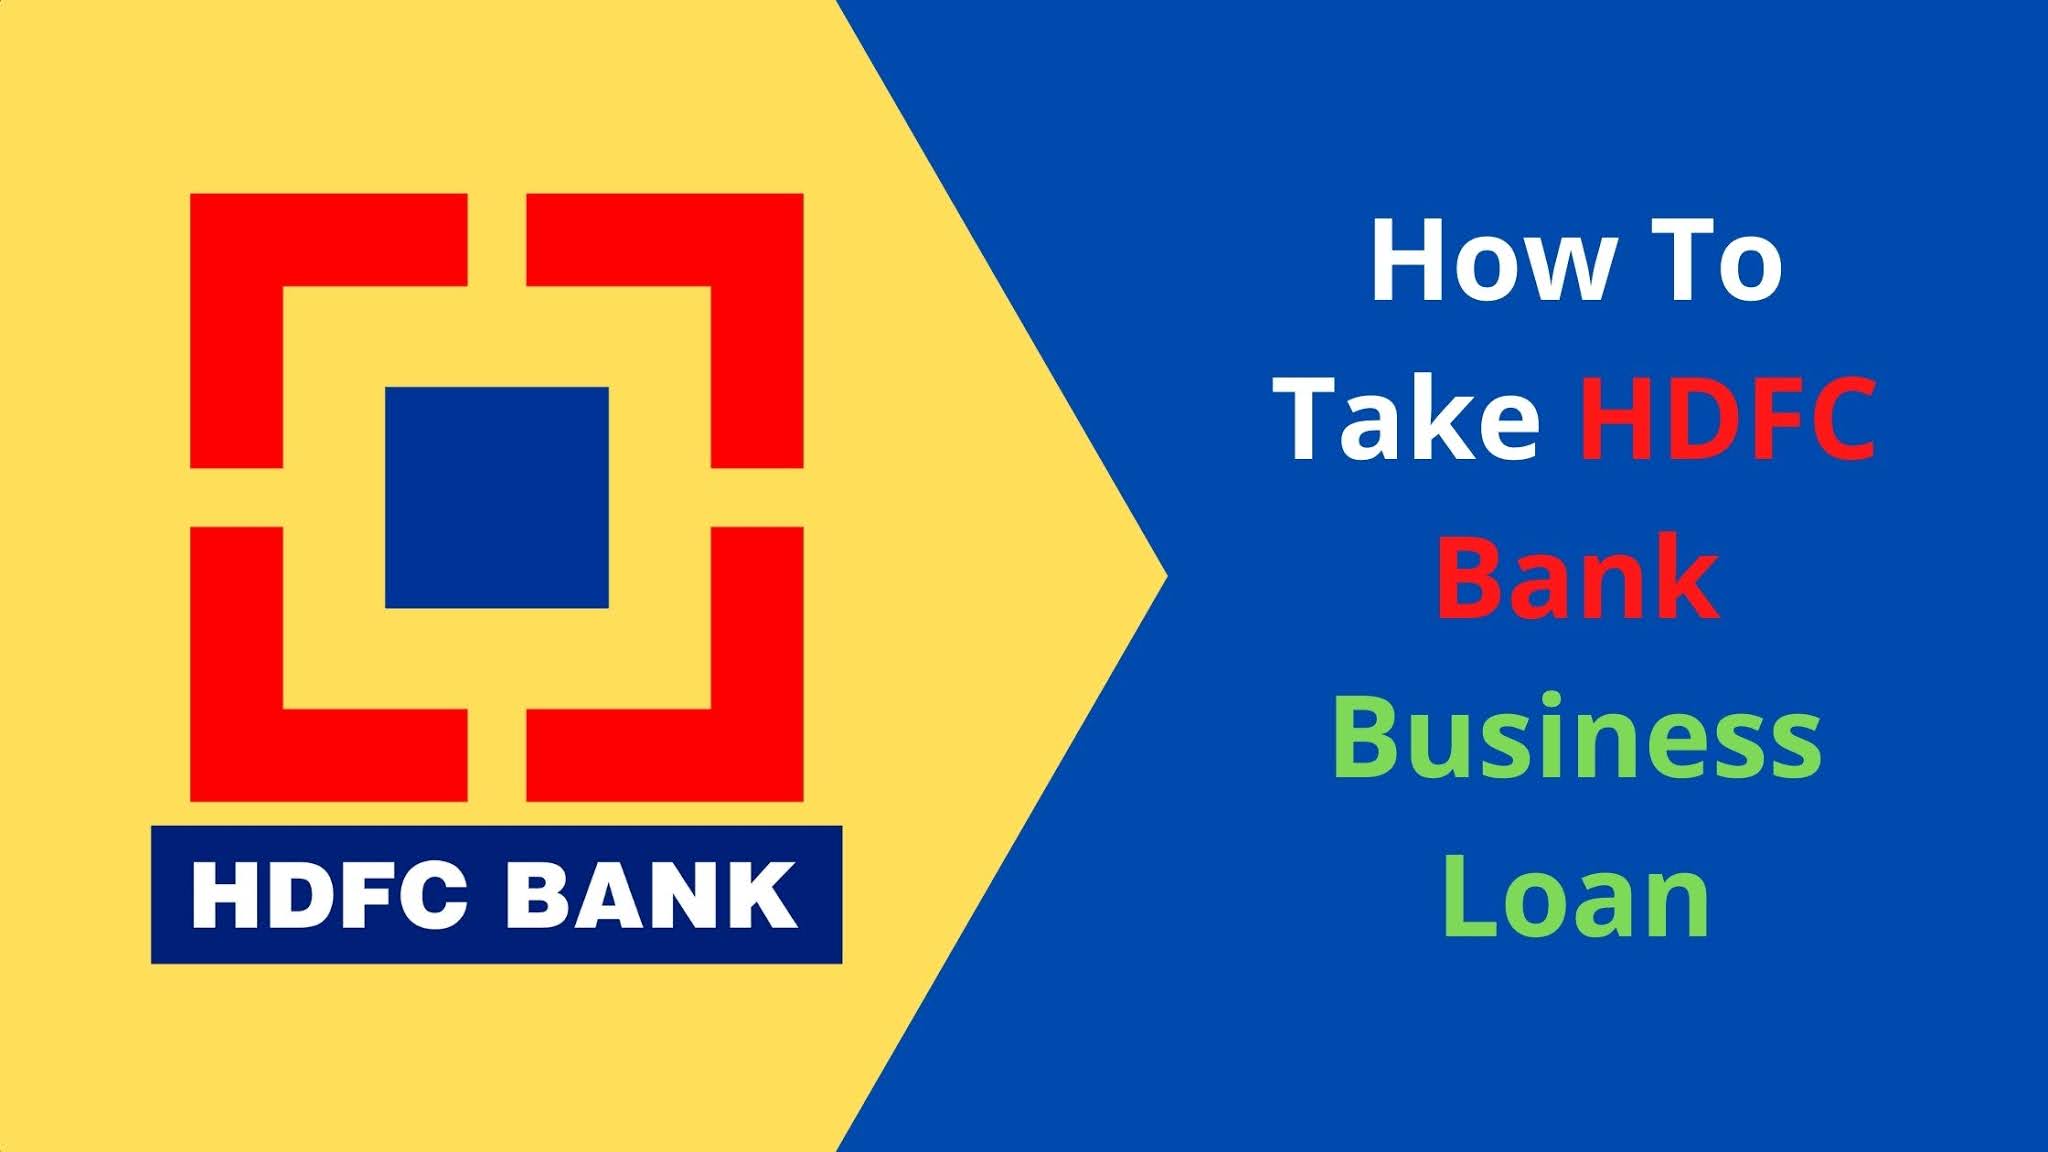 How To Take HDFC Bank Business Loan